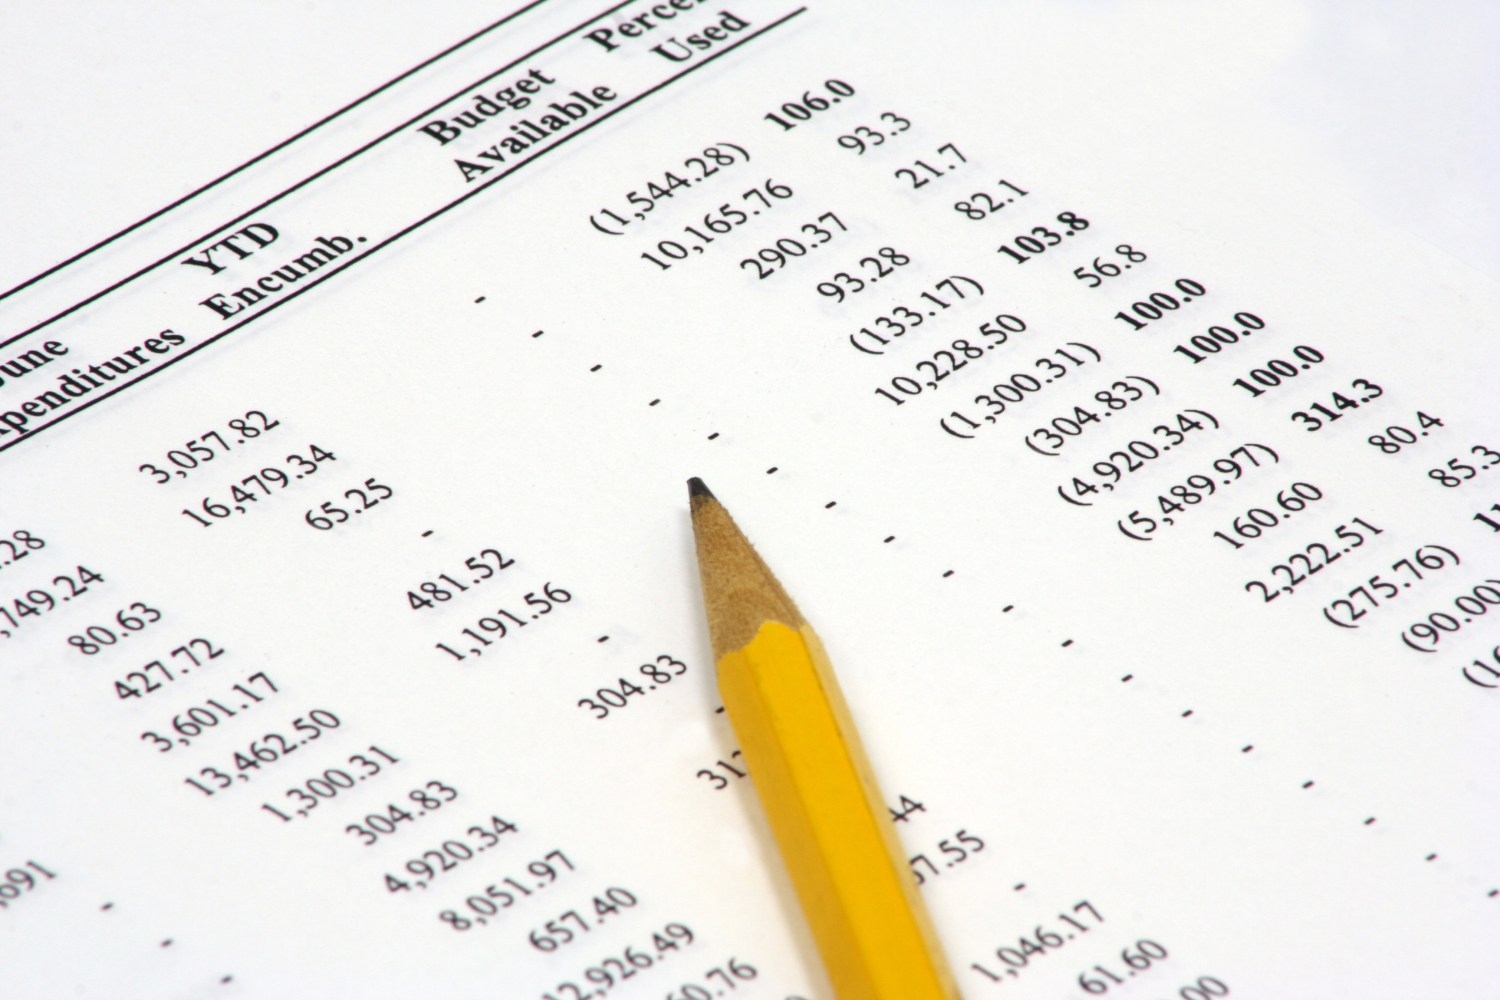 A close-up view of a budget performance spreadsheet with with a pencil sitting on it. The numbers are actually real budget figures, but there's no identifying words or symbols.